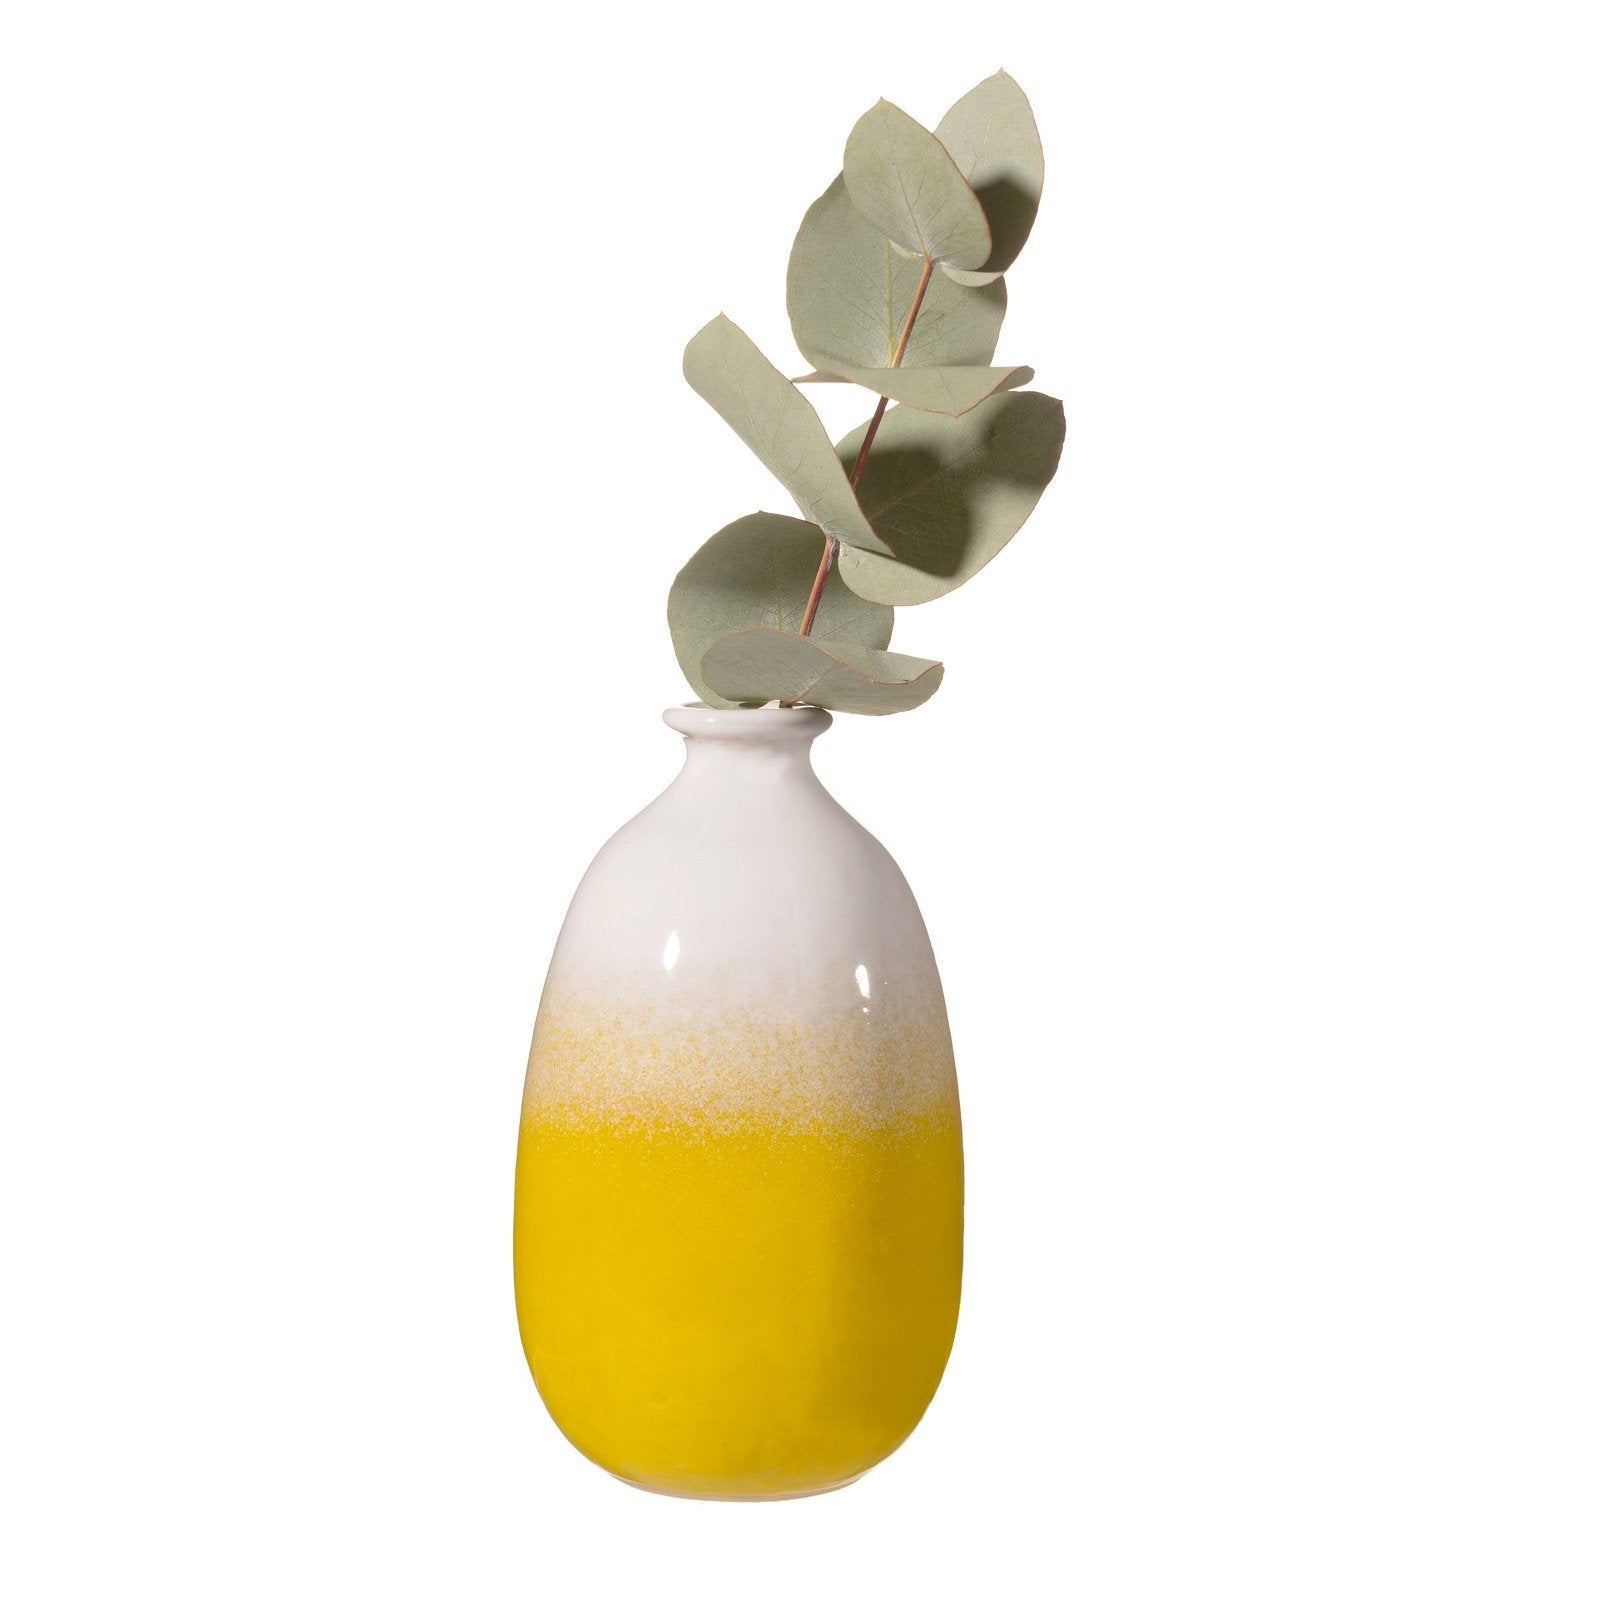 View Dip Glazed Ombre Yellow Vase information